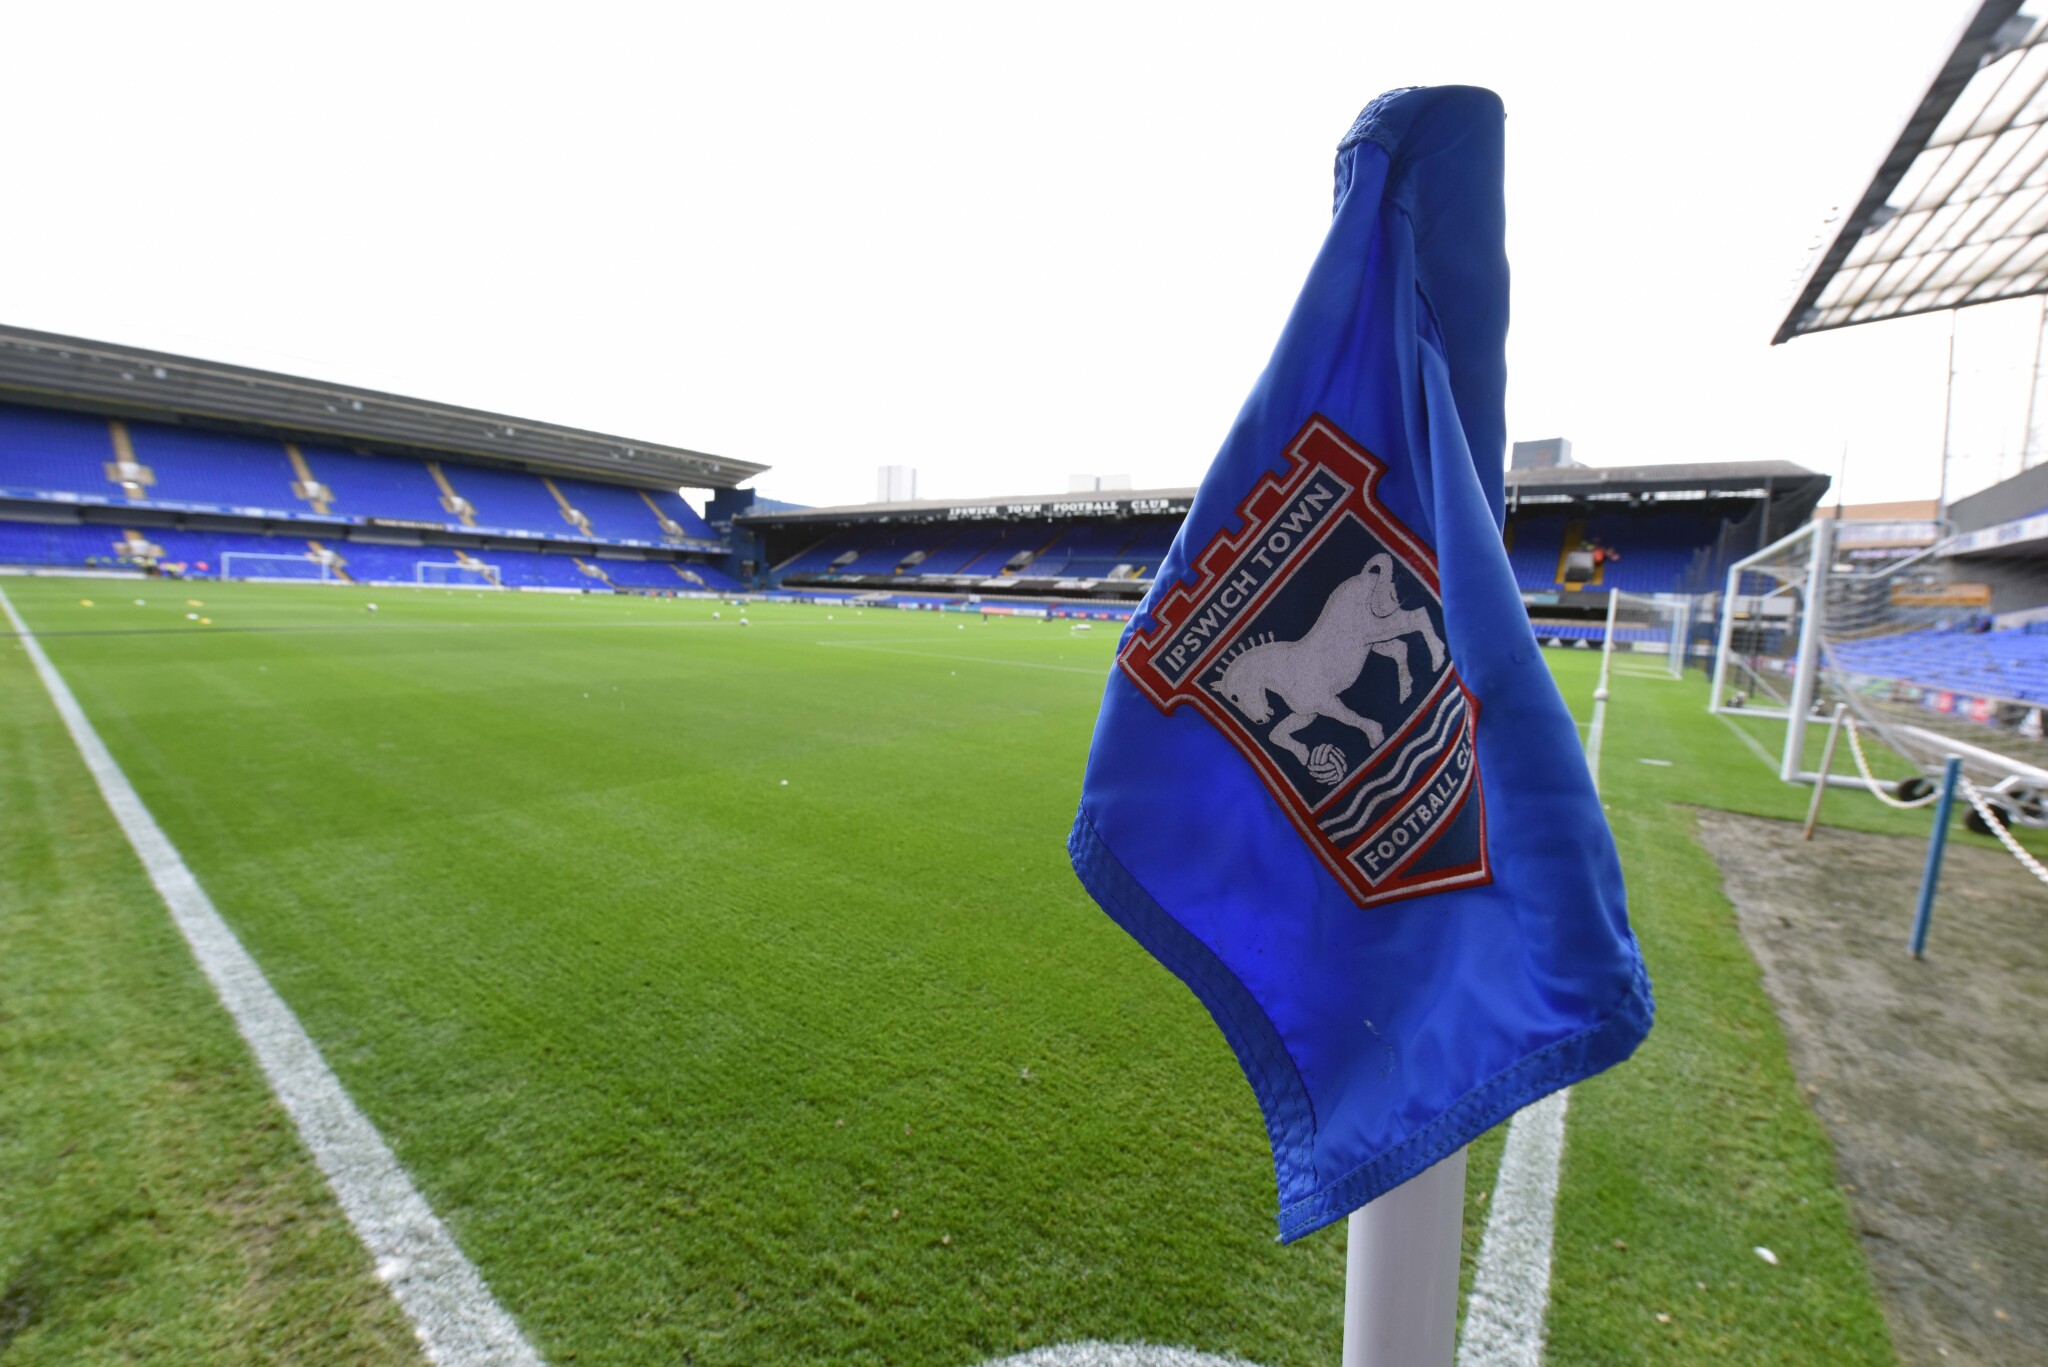 Ipswich Town CHAMPIONSHIP OPPONENTS CONFIRMED